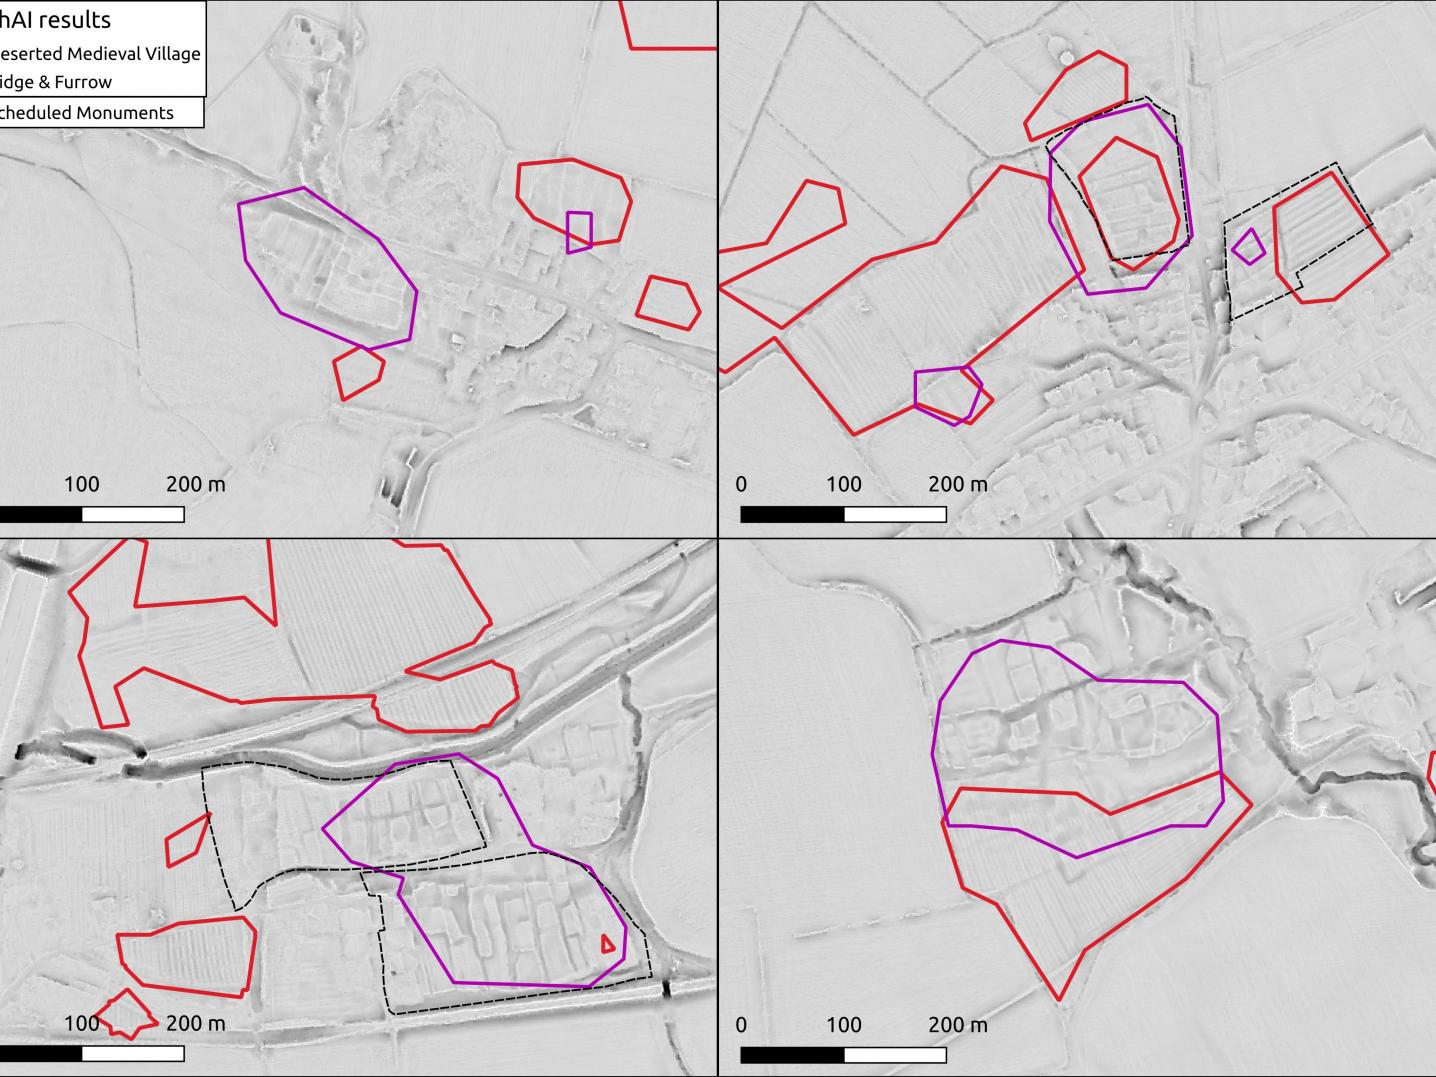 A LiDAR image showing image segmentation results of ridge and furrow earthworks (Medieval ploughing remains) and Deserted Medieval Villages in England. 